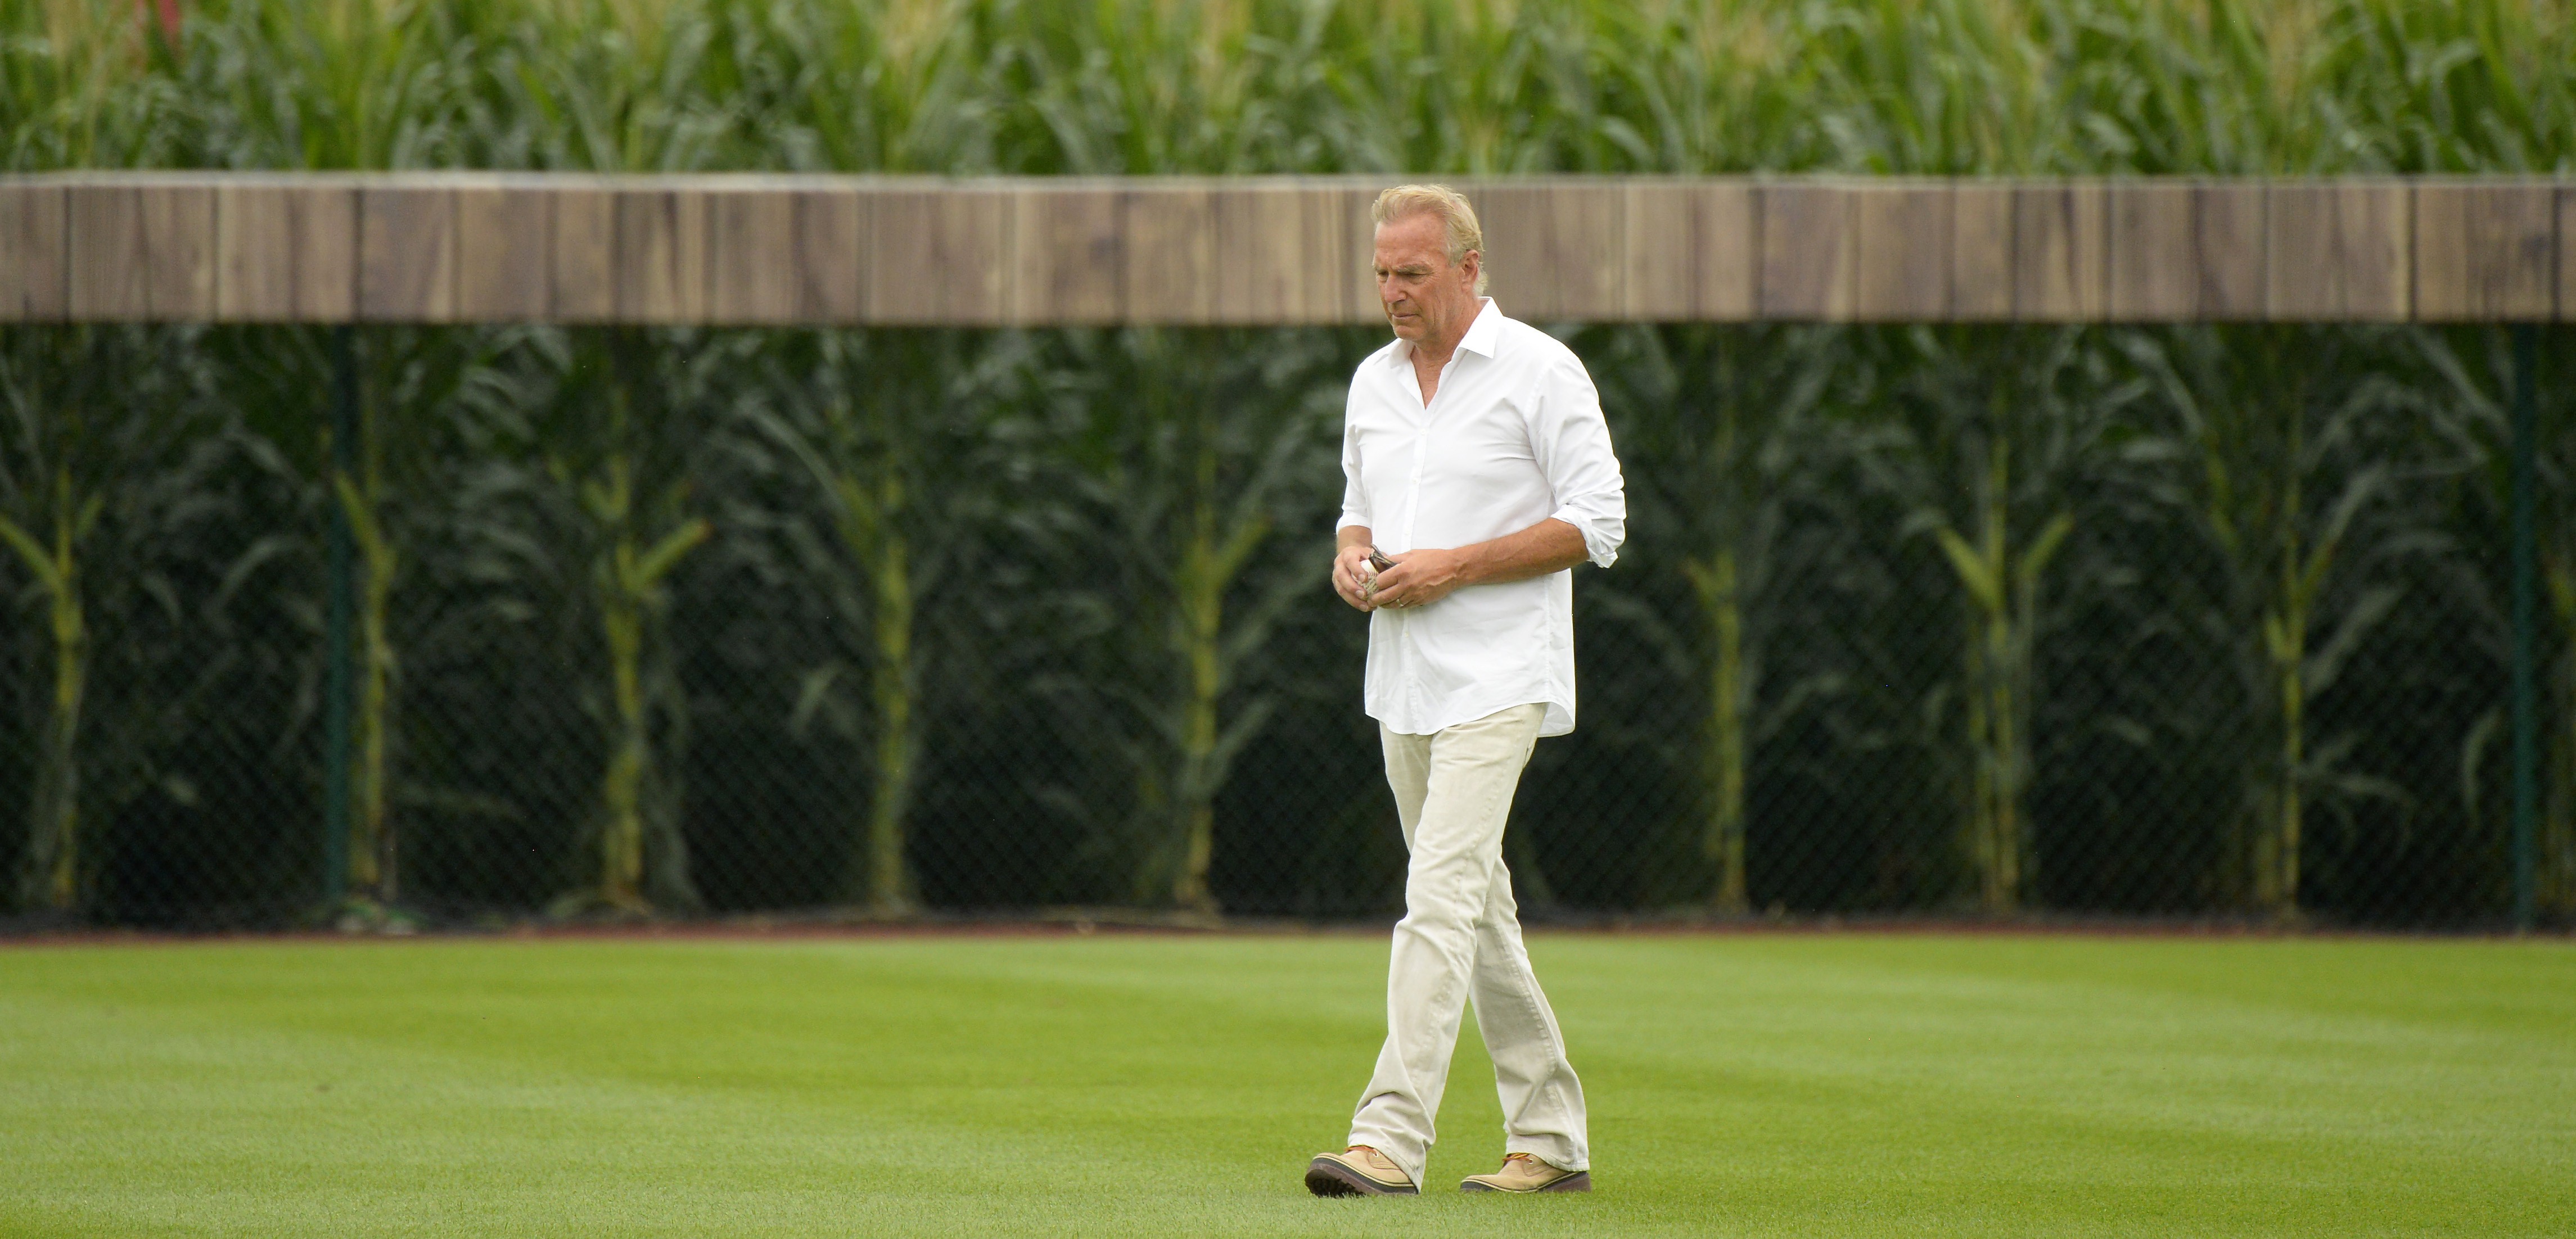 Kevin Costner walking in the outfield before the Chicago White Sox and New York Yankees game in 2021 | Source: Getty Images